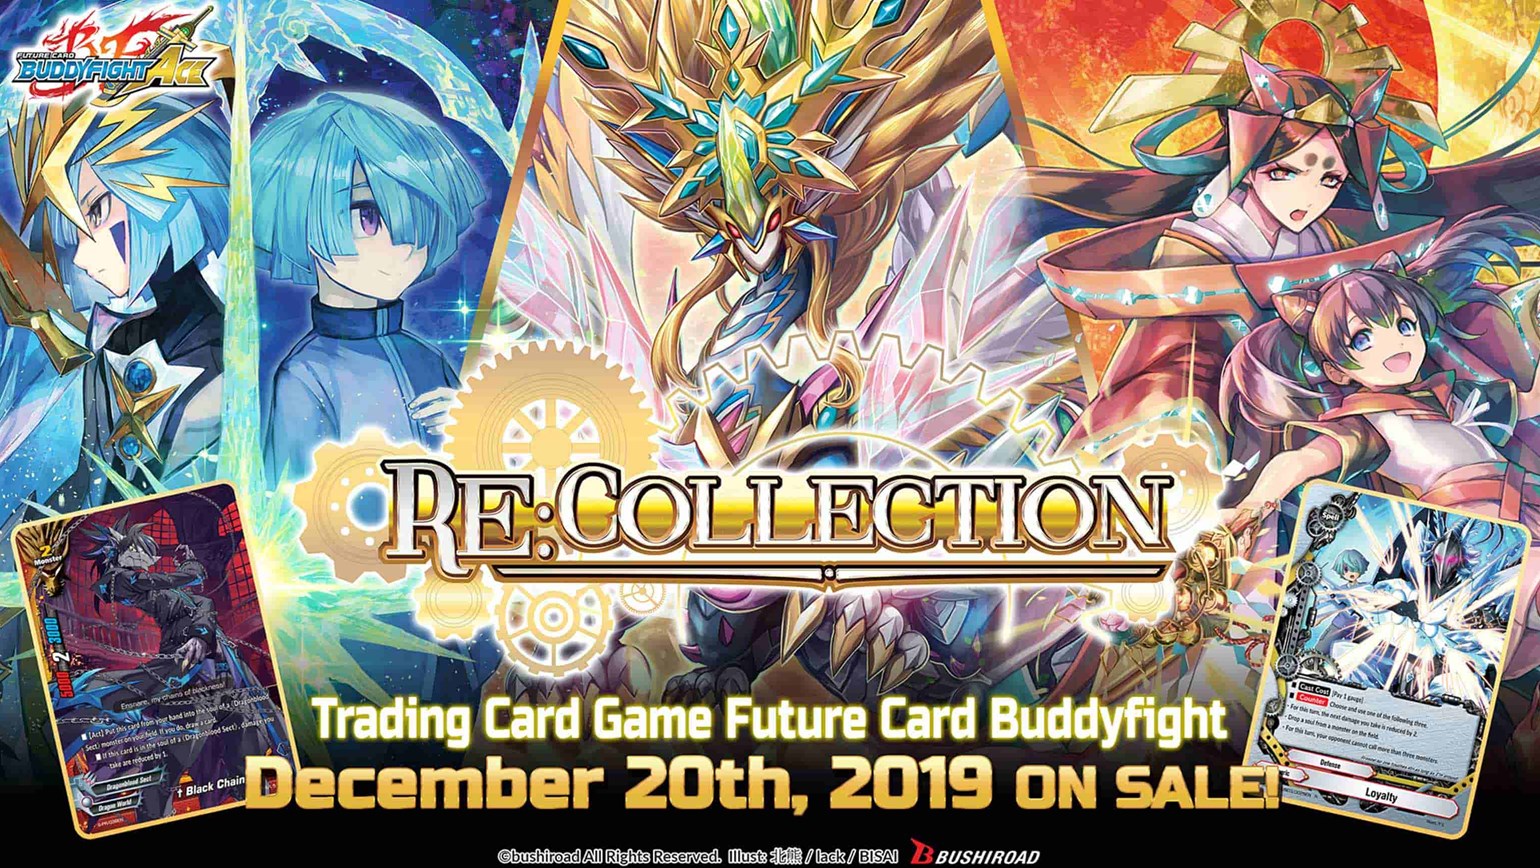 Future Card Buddyfight Ace Re: Collection Vol. 1 Coming December 20th